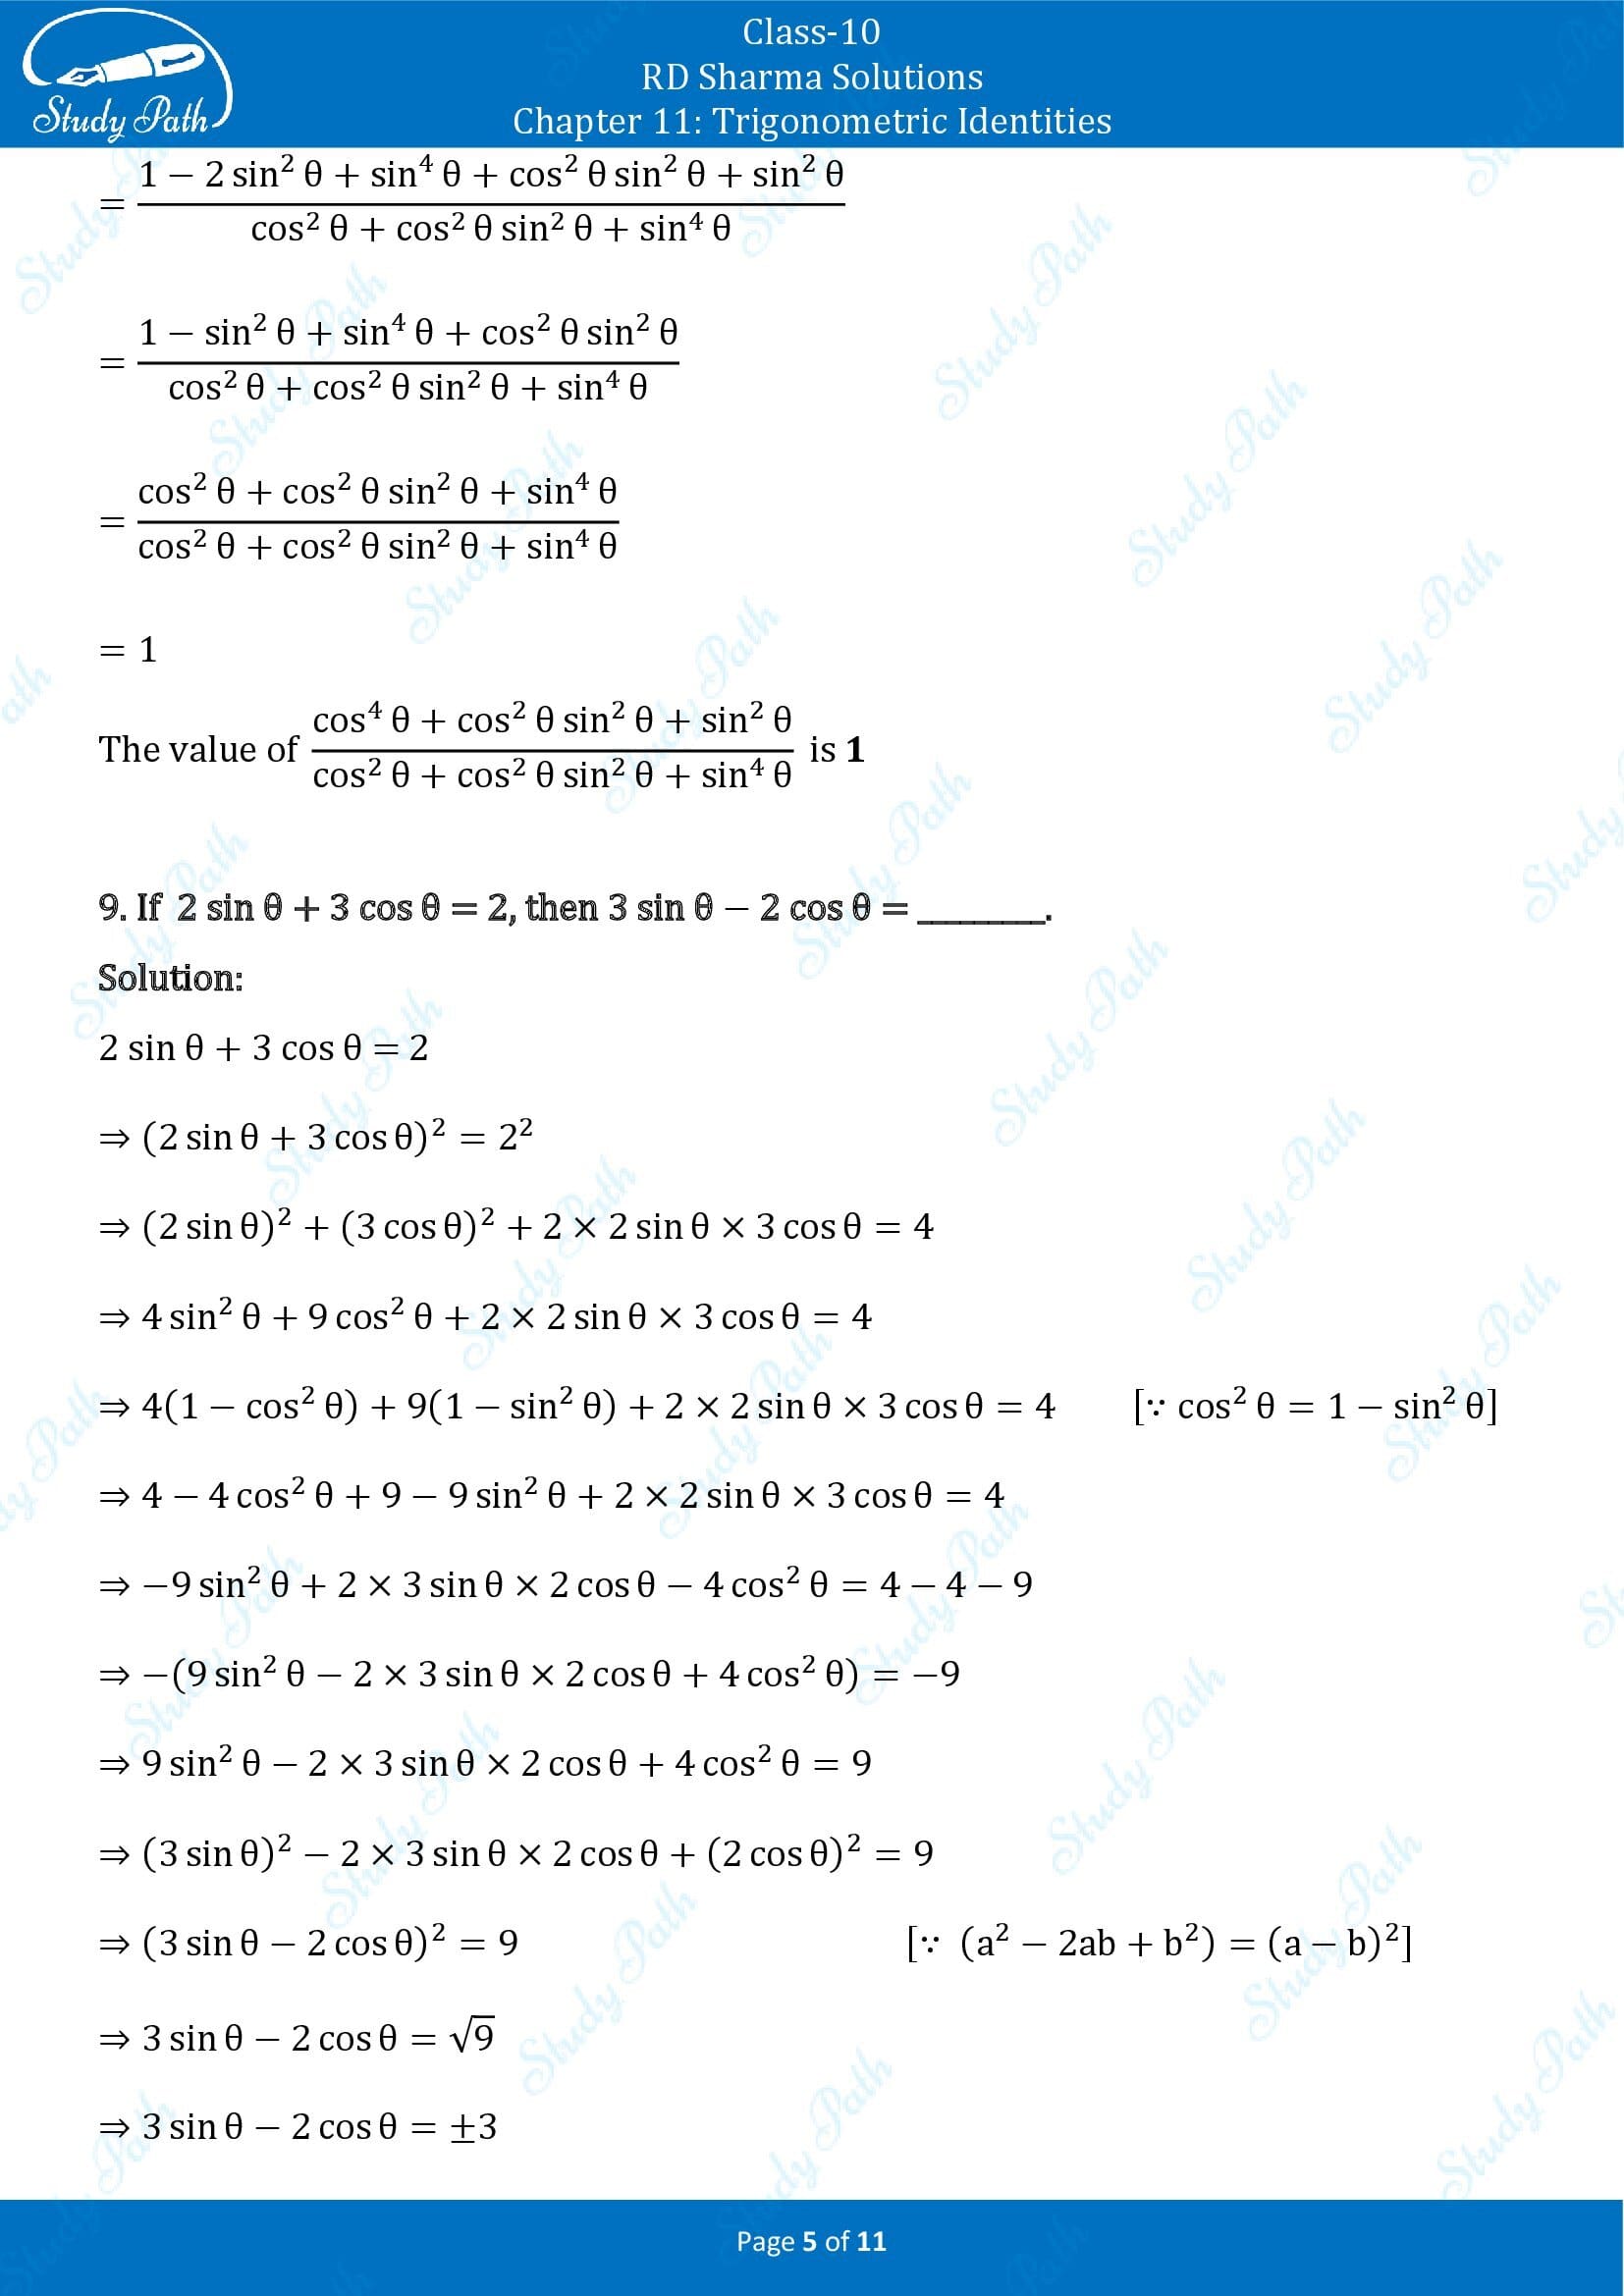 RD Sharma Solutions Class 10 Chapter 11 Trigonometric Identities Fill in the Blank Type Questions FBQs 00005